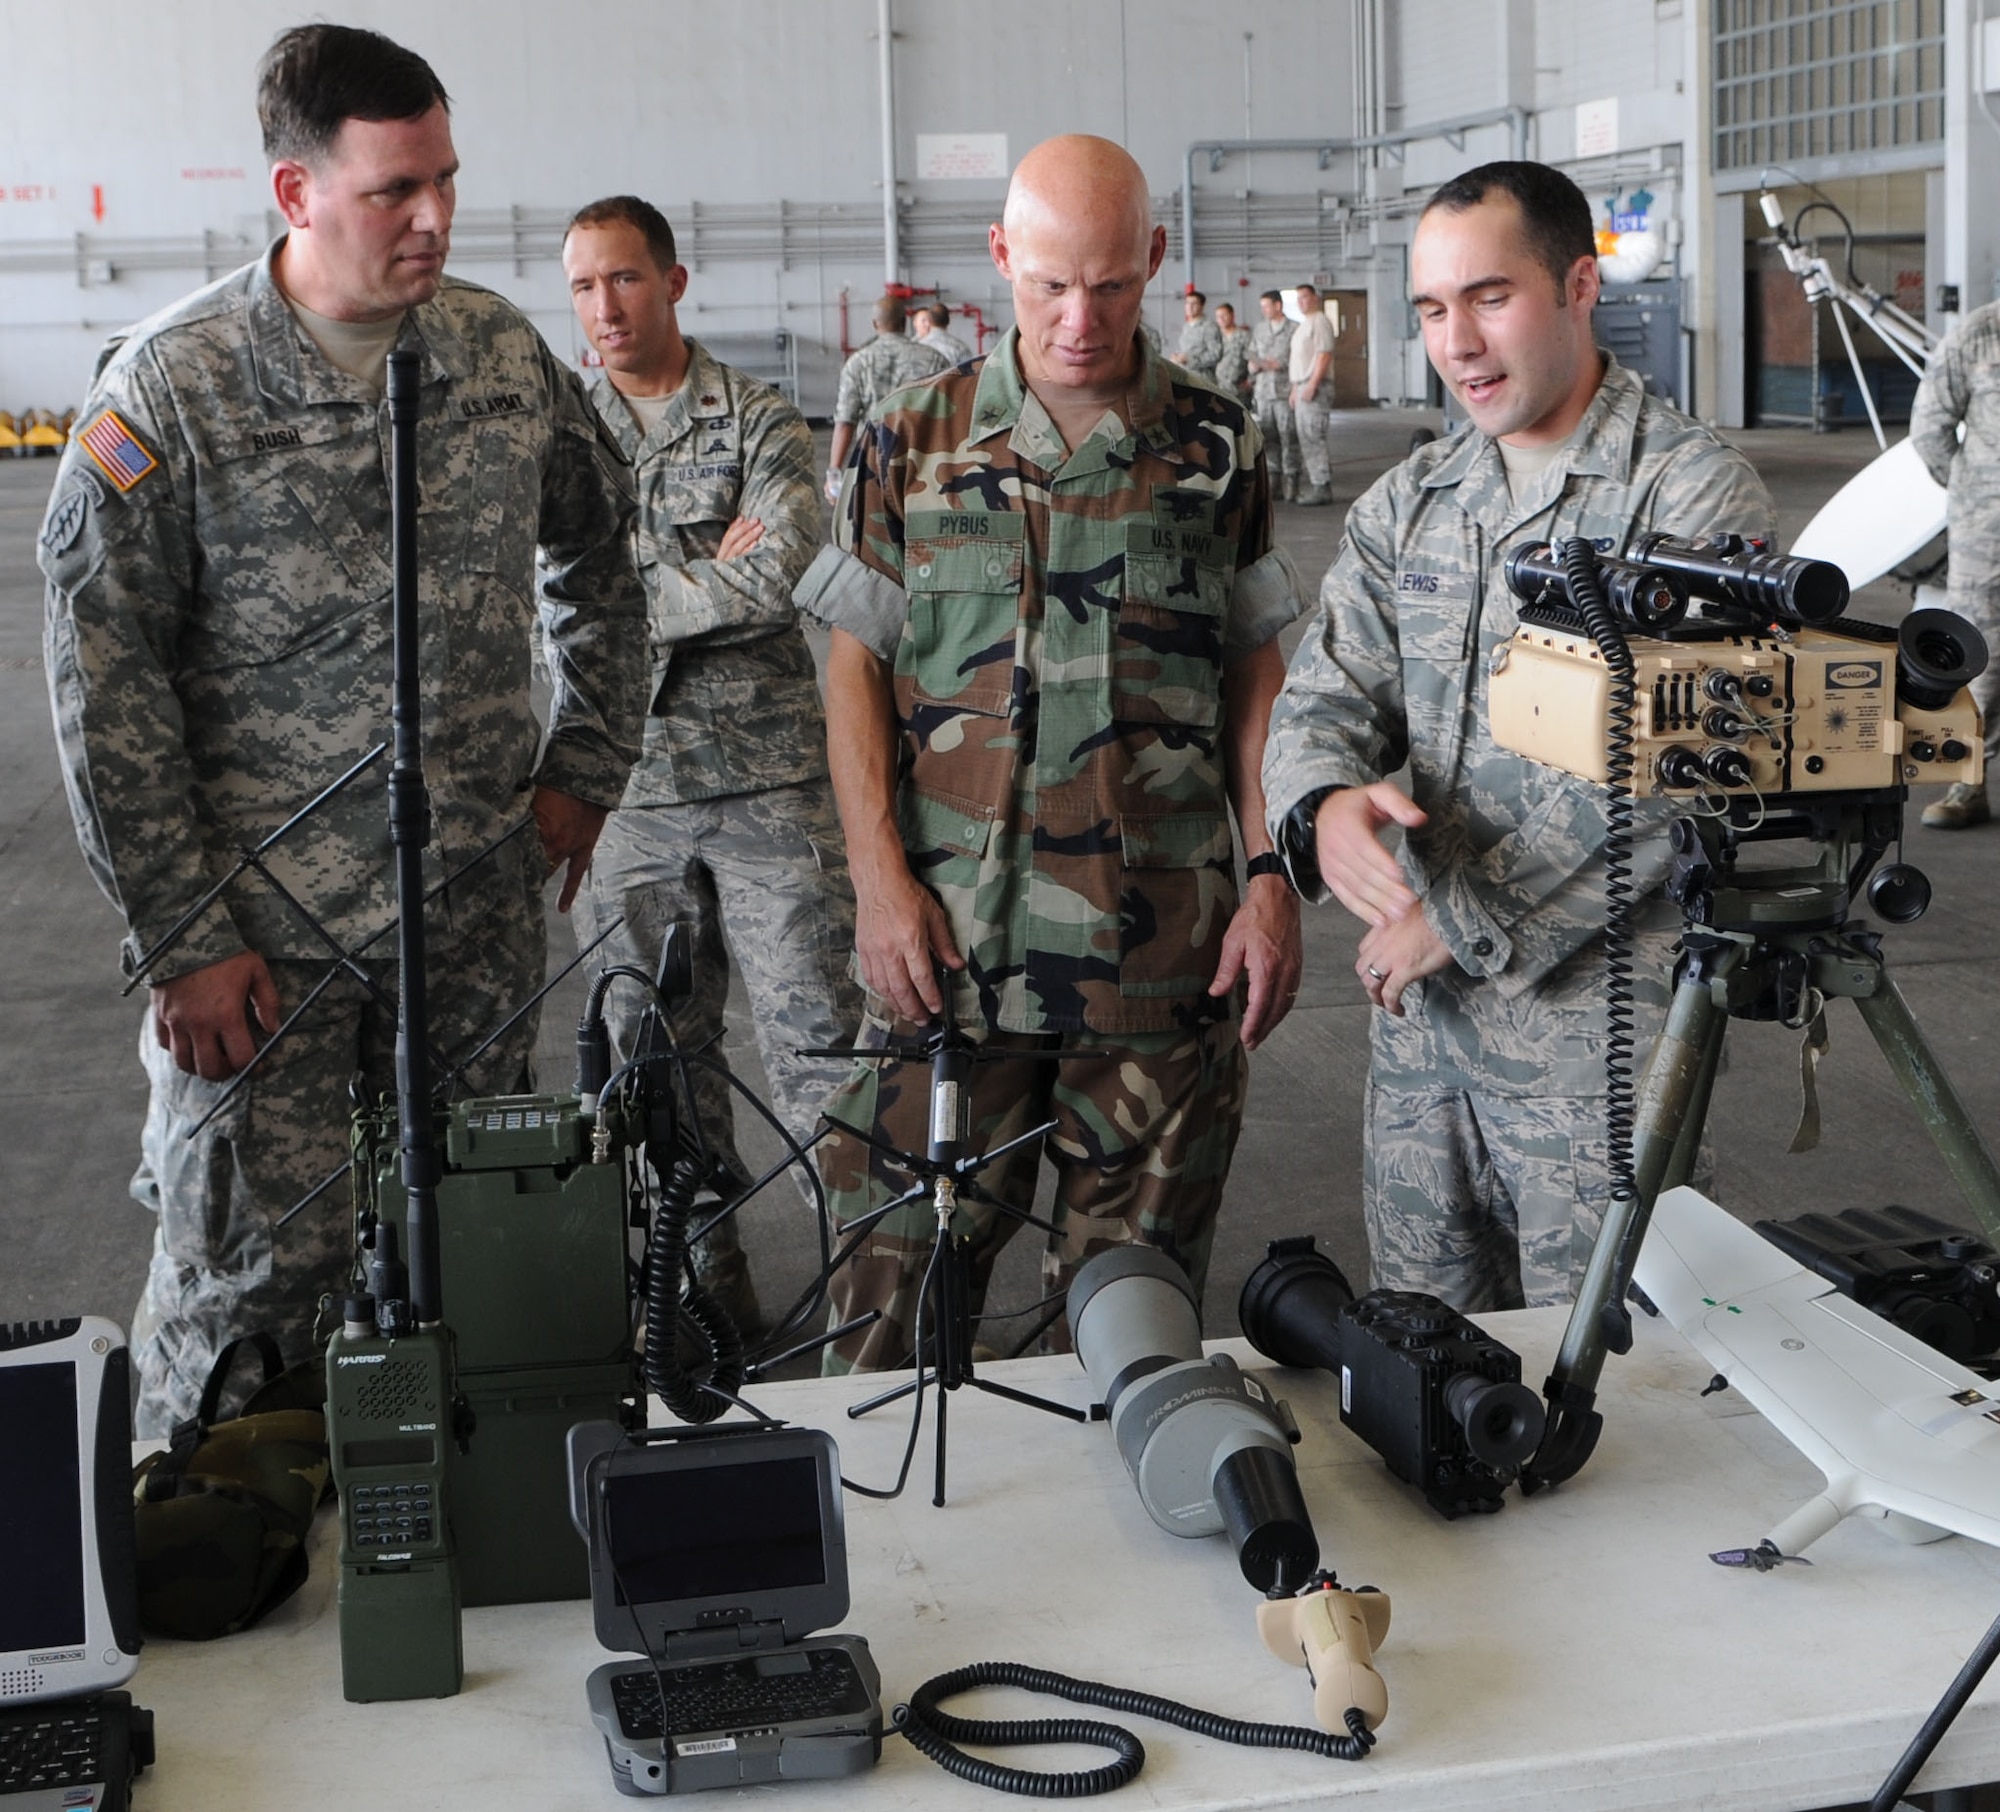 KADENA AIR BASE, Japan -- Senior Airman Norman Lewis (right), 320th Special Tactics Squadron, briefs Rear Adm. Sean Pybus (center), the commander of Special Operations Command, Pacific, and Command Sgt. Maj. Stephen Bush, the senior enlisted advisor for Special Operations Command, Pacific, on equipment used by members of the 320th STS to support air, ground, and maritime combat operations. This was Rear Adm. Pybus' first visit to the 353rd SOG since taking command of SOCPAC June 12. The 353rd SOG is SOCPAC's air component command responsible for command and control of all SOF air in the Pacific AOR.  This visit focused on orienting Rear Adm. Pybus and Command Sgt. Maj. Bush on the group's mission and capabilities. (U.S. Air Force Photo by Tech. Sgt. Aaron Cram) 